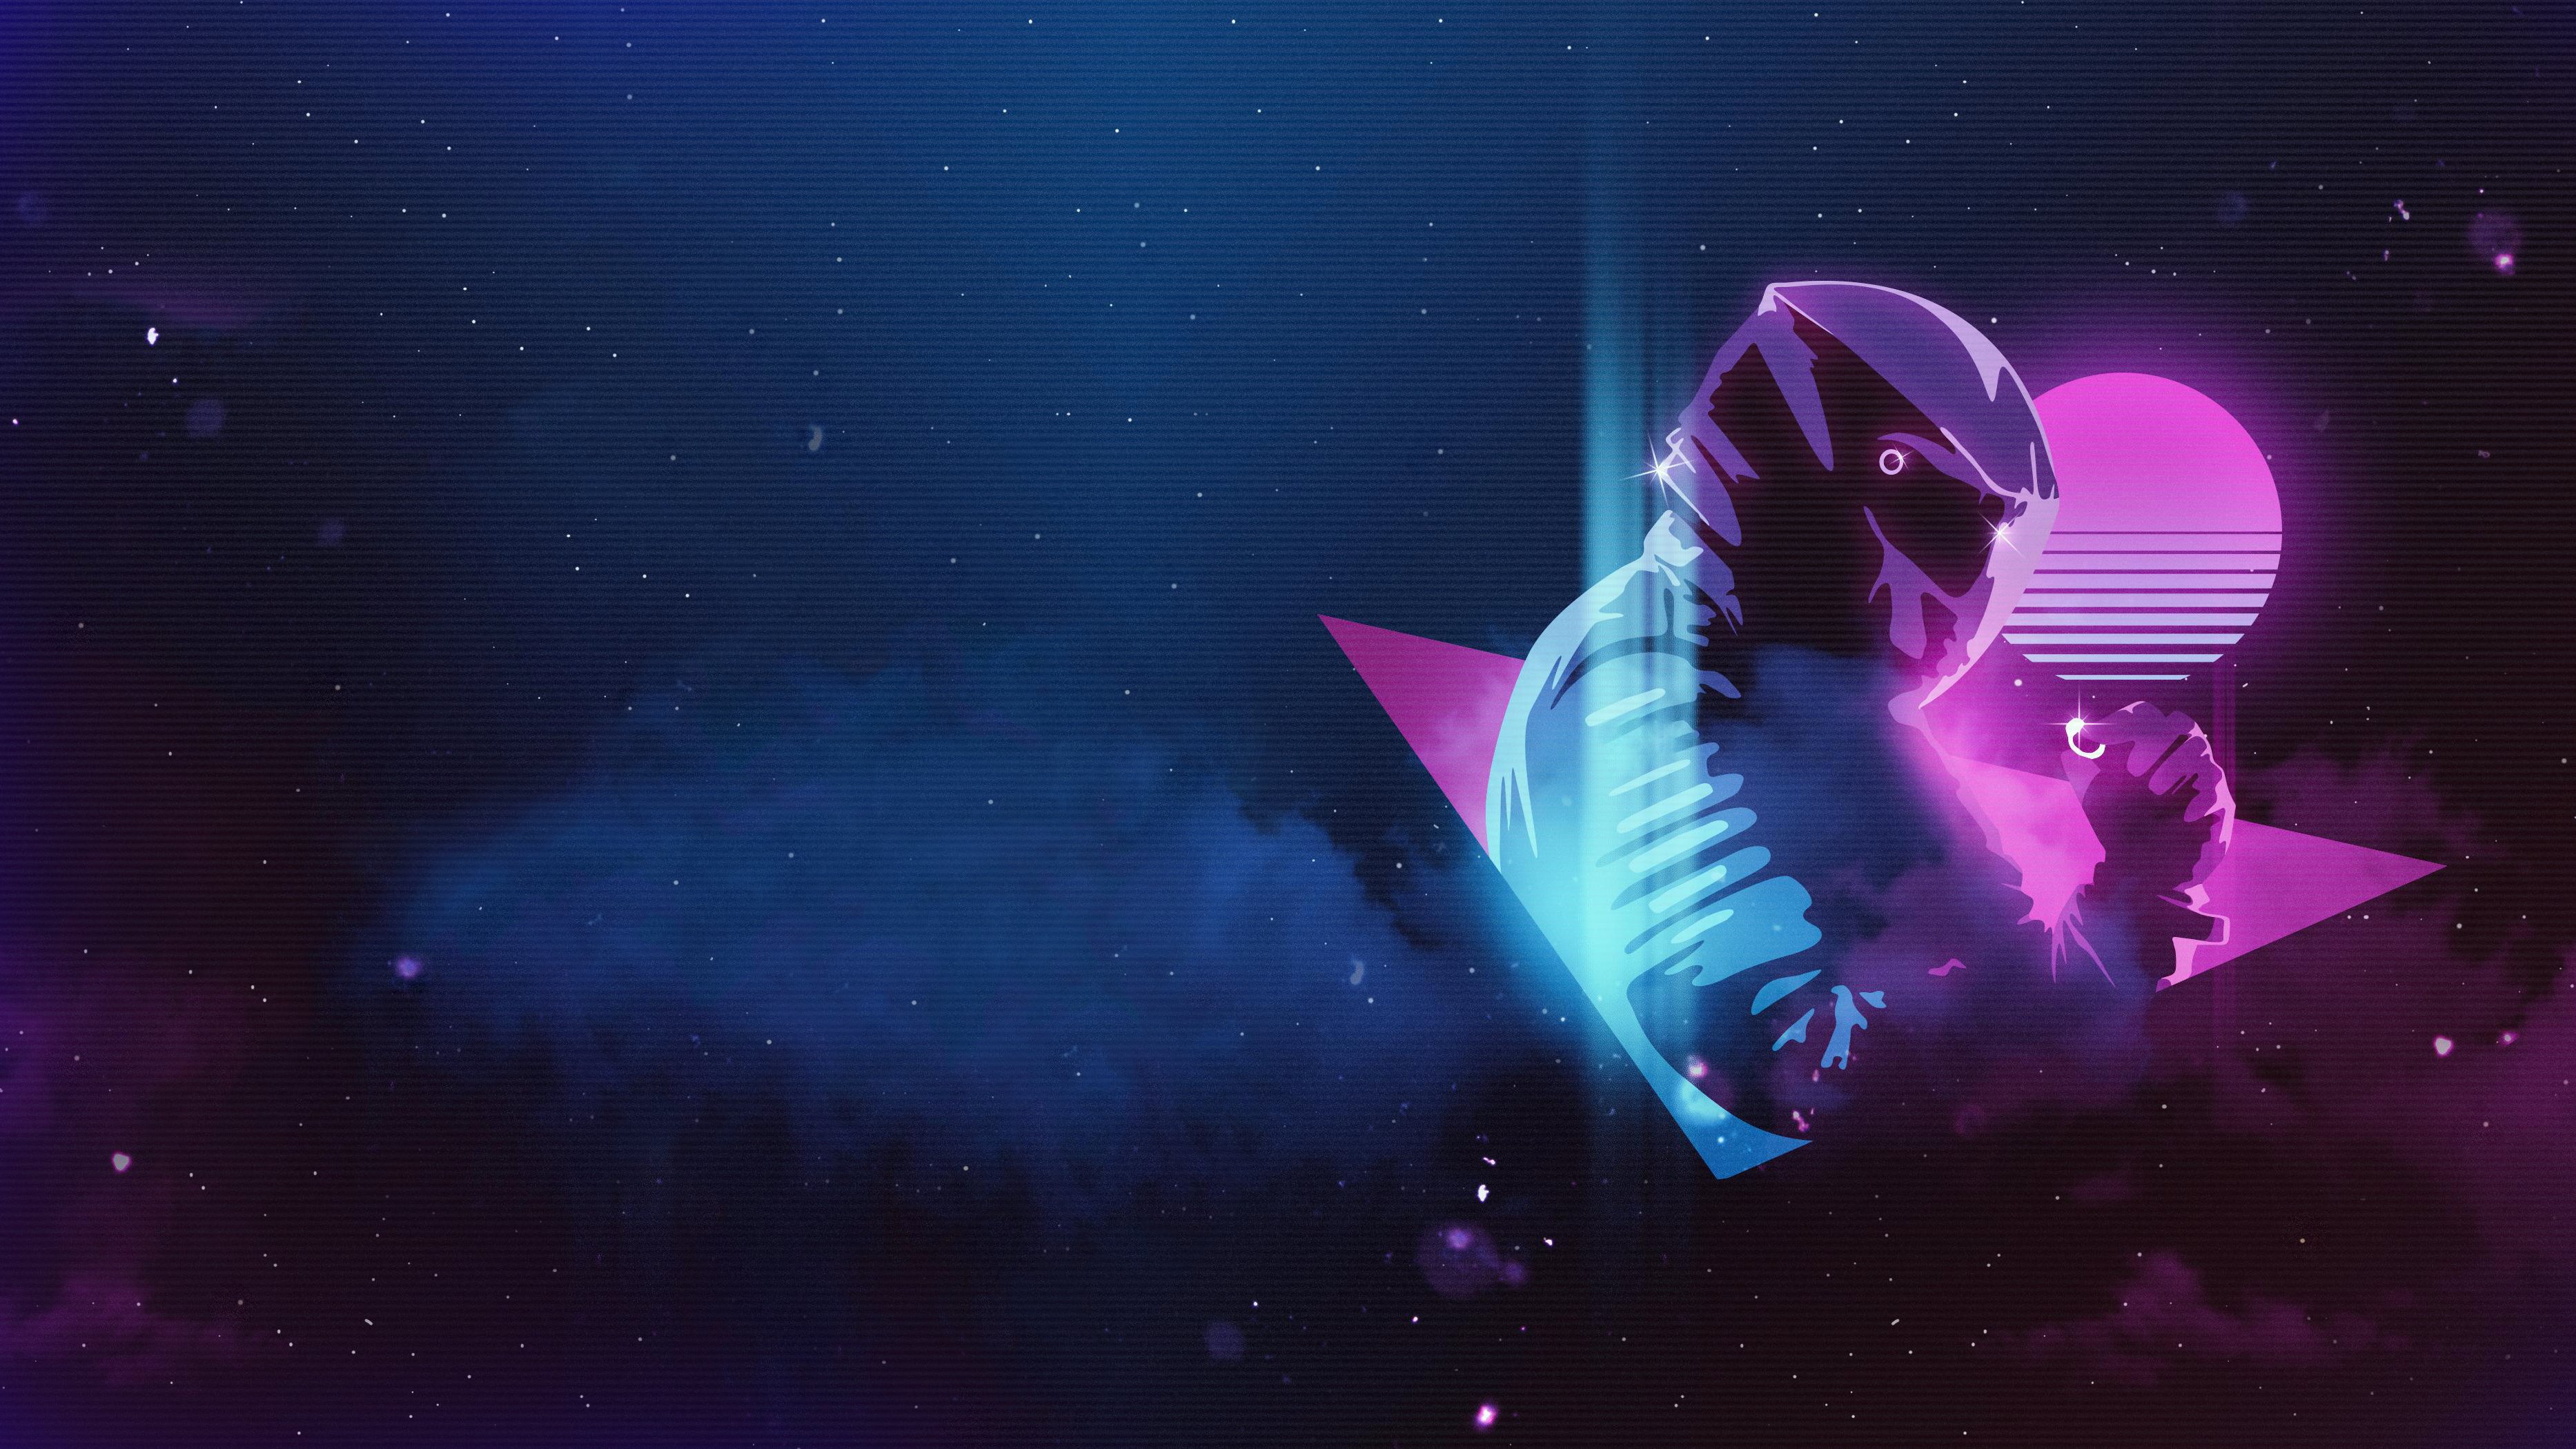 Pylot, Musician, 1980s, Synthwave, New Retro Wave, Monstercat, Neon, Motorcyclist, Space, Nebula, Scanlines Wallpaper